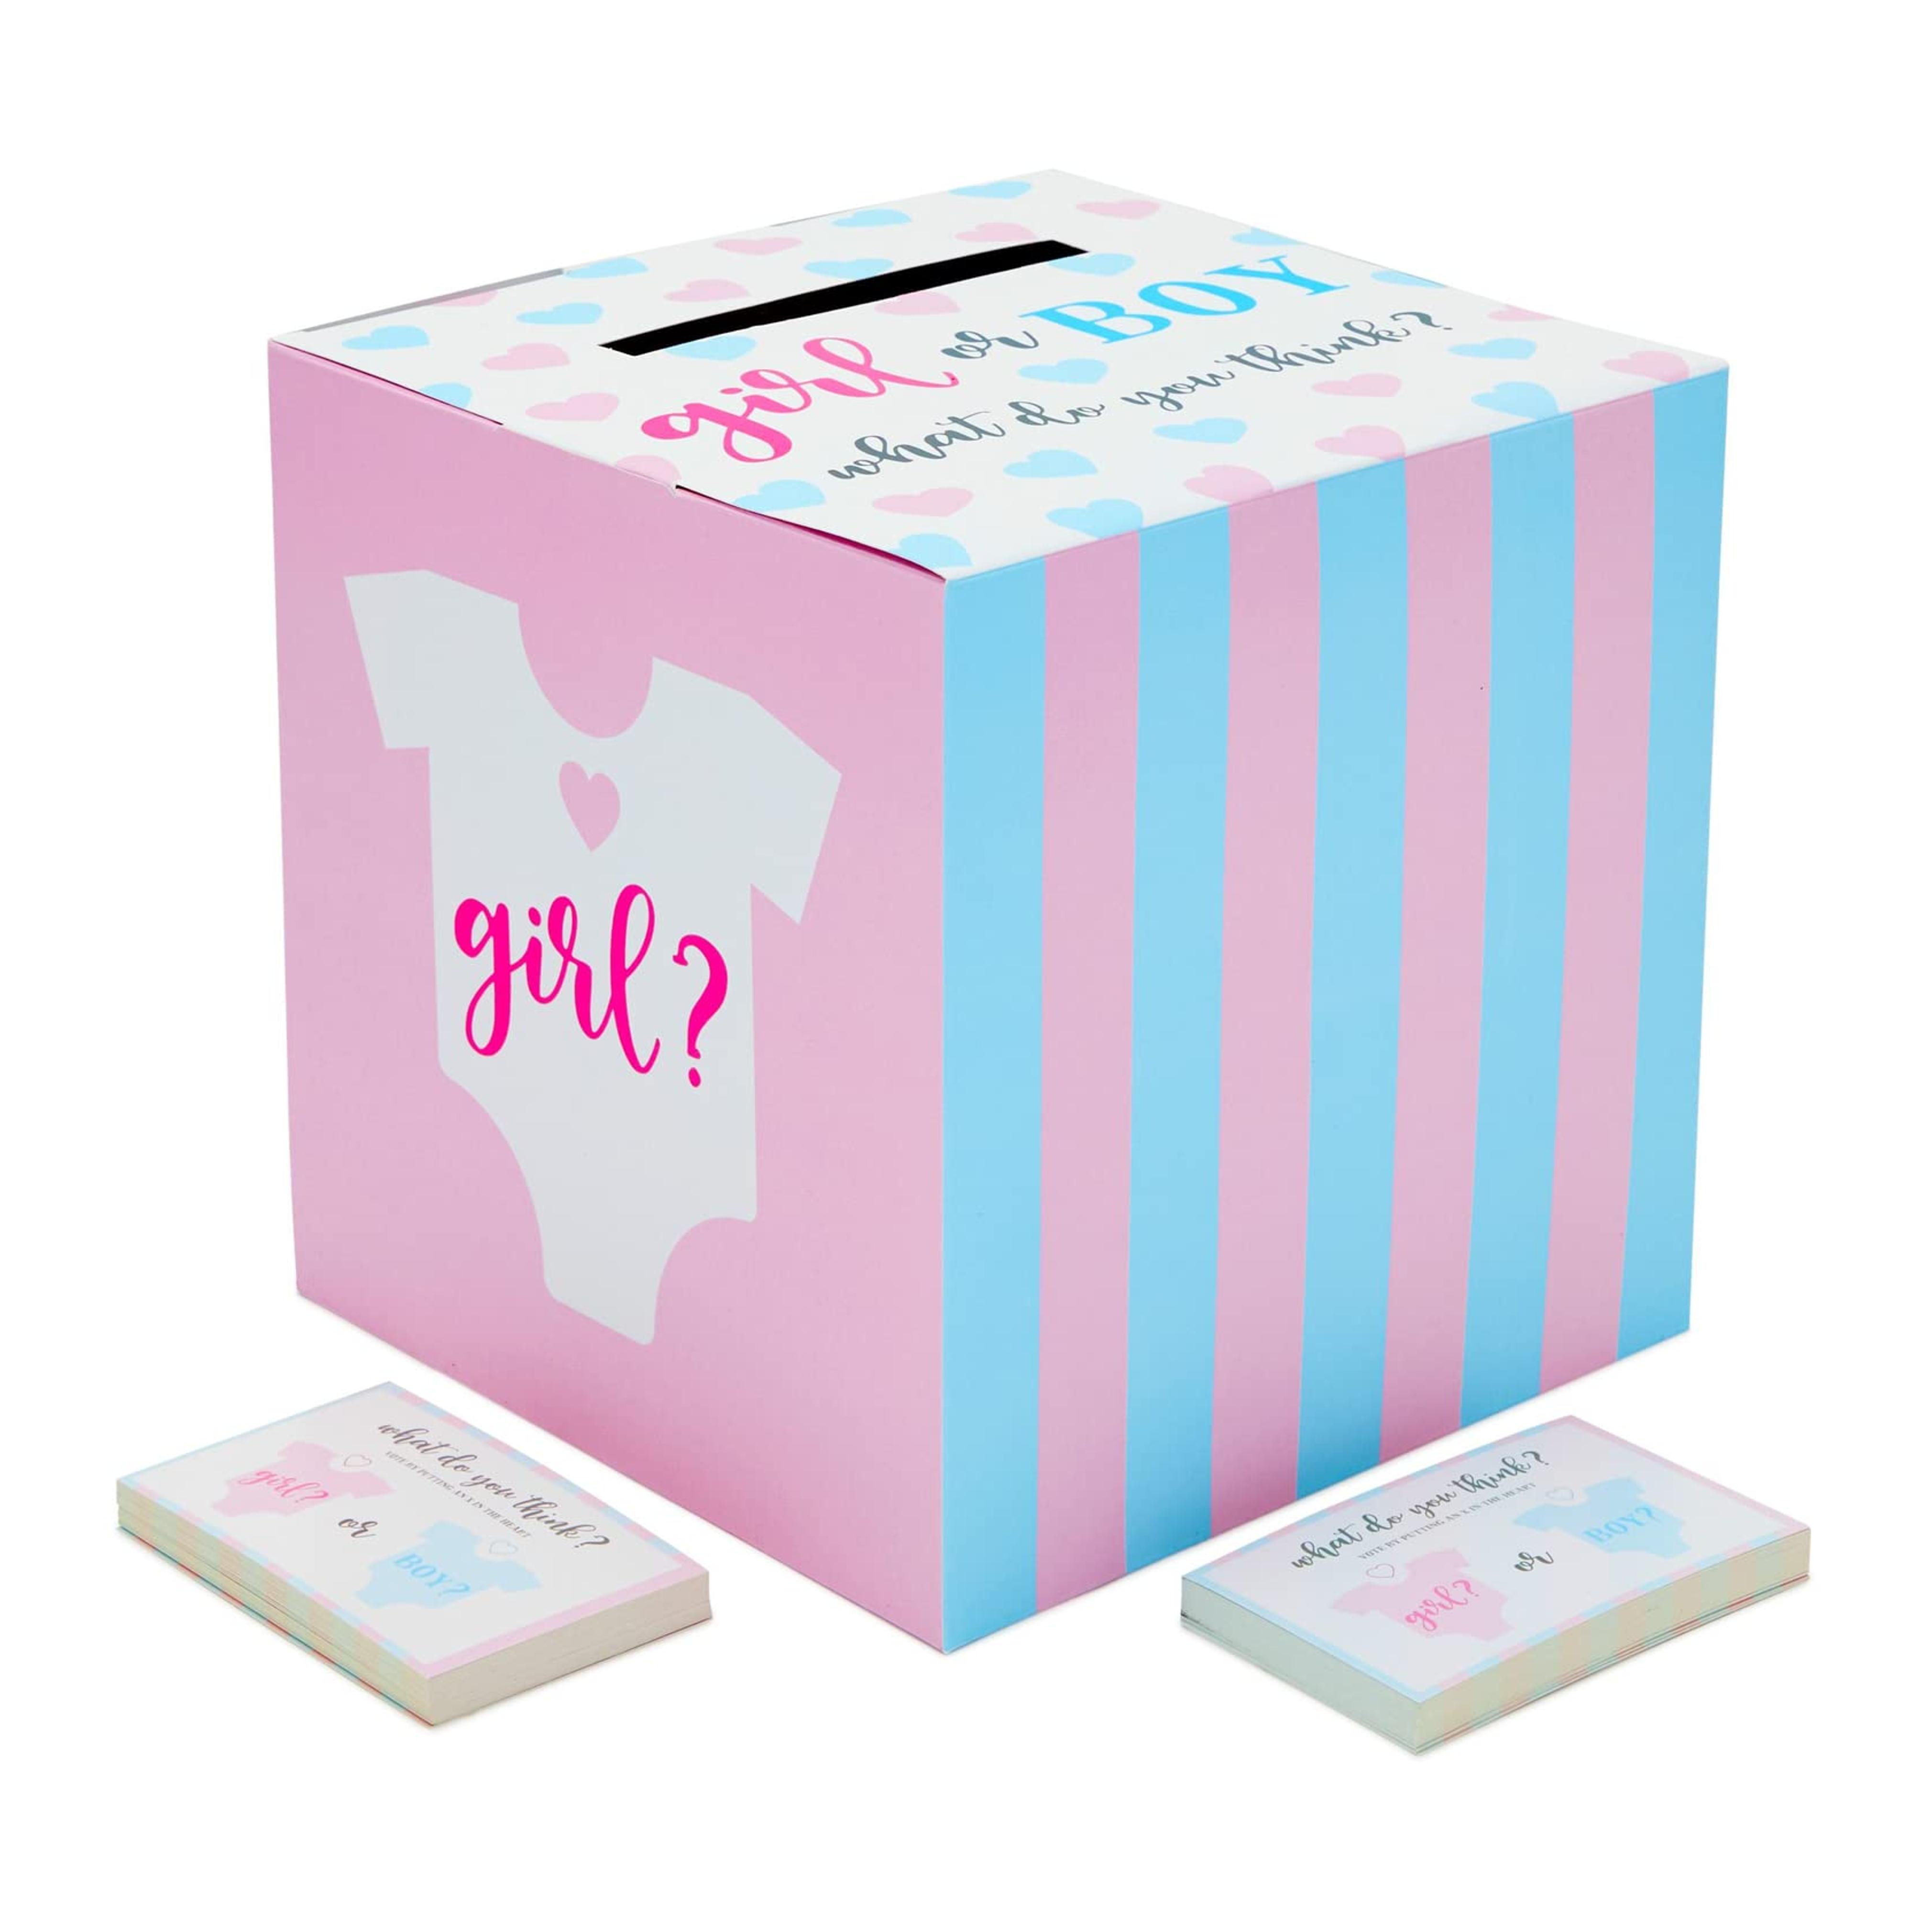 Boy or Girl Gender Reveal Ballot Box with 50 Cards, Baby Shower Games